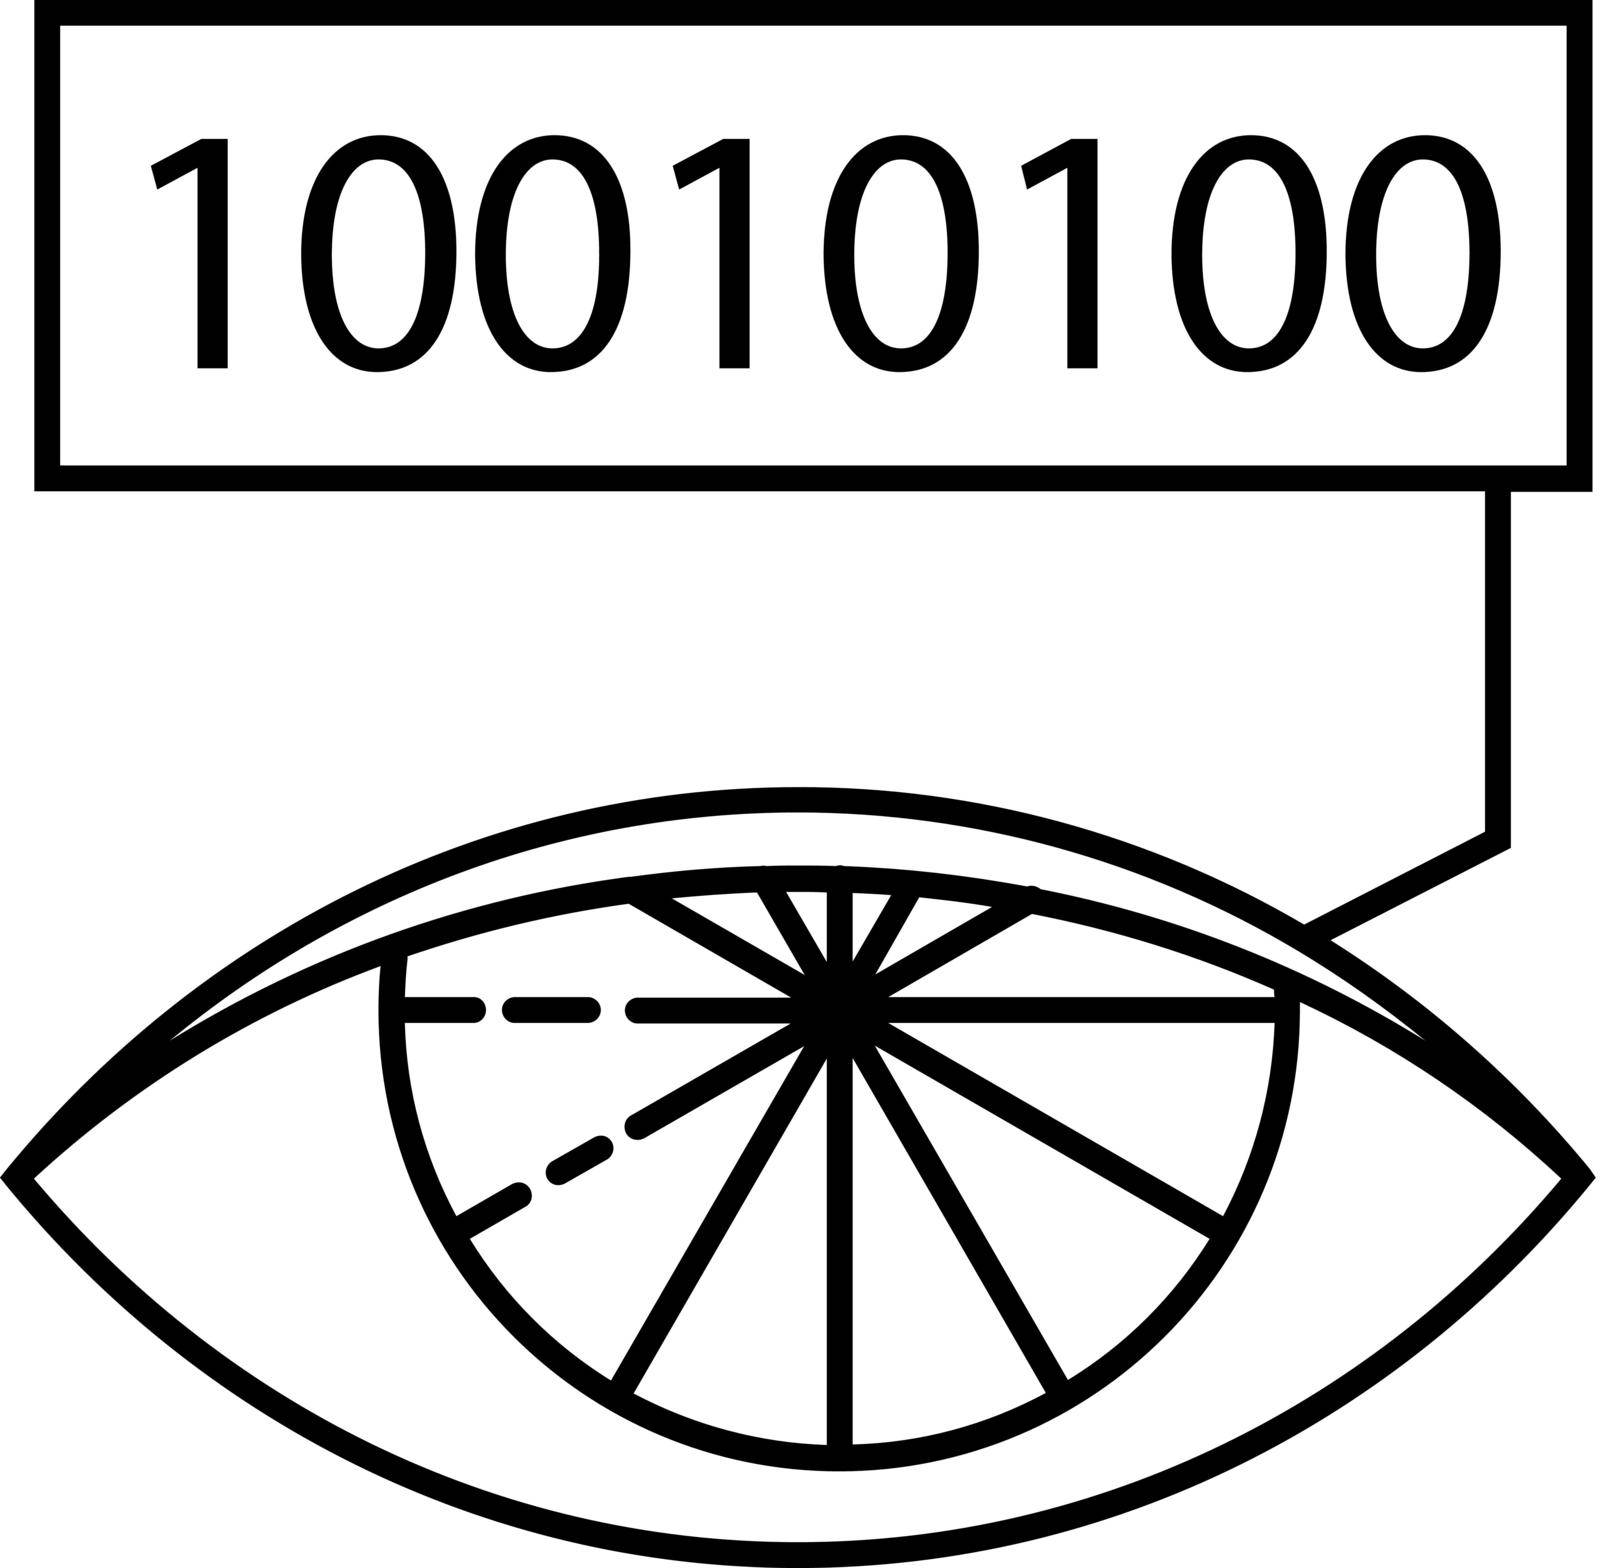 Retina based surveillance icon in thin outline. Vector illustration.